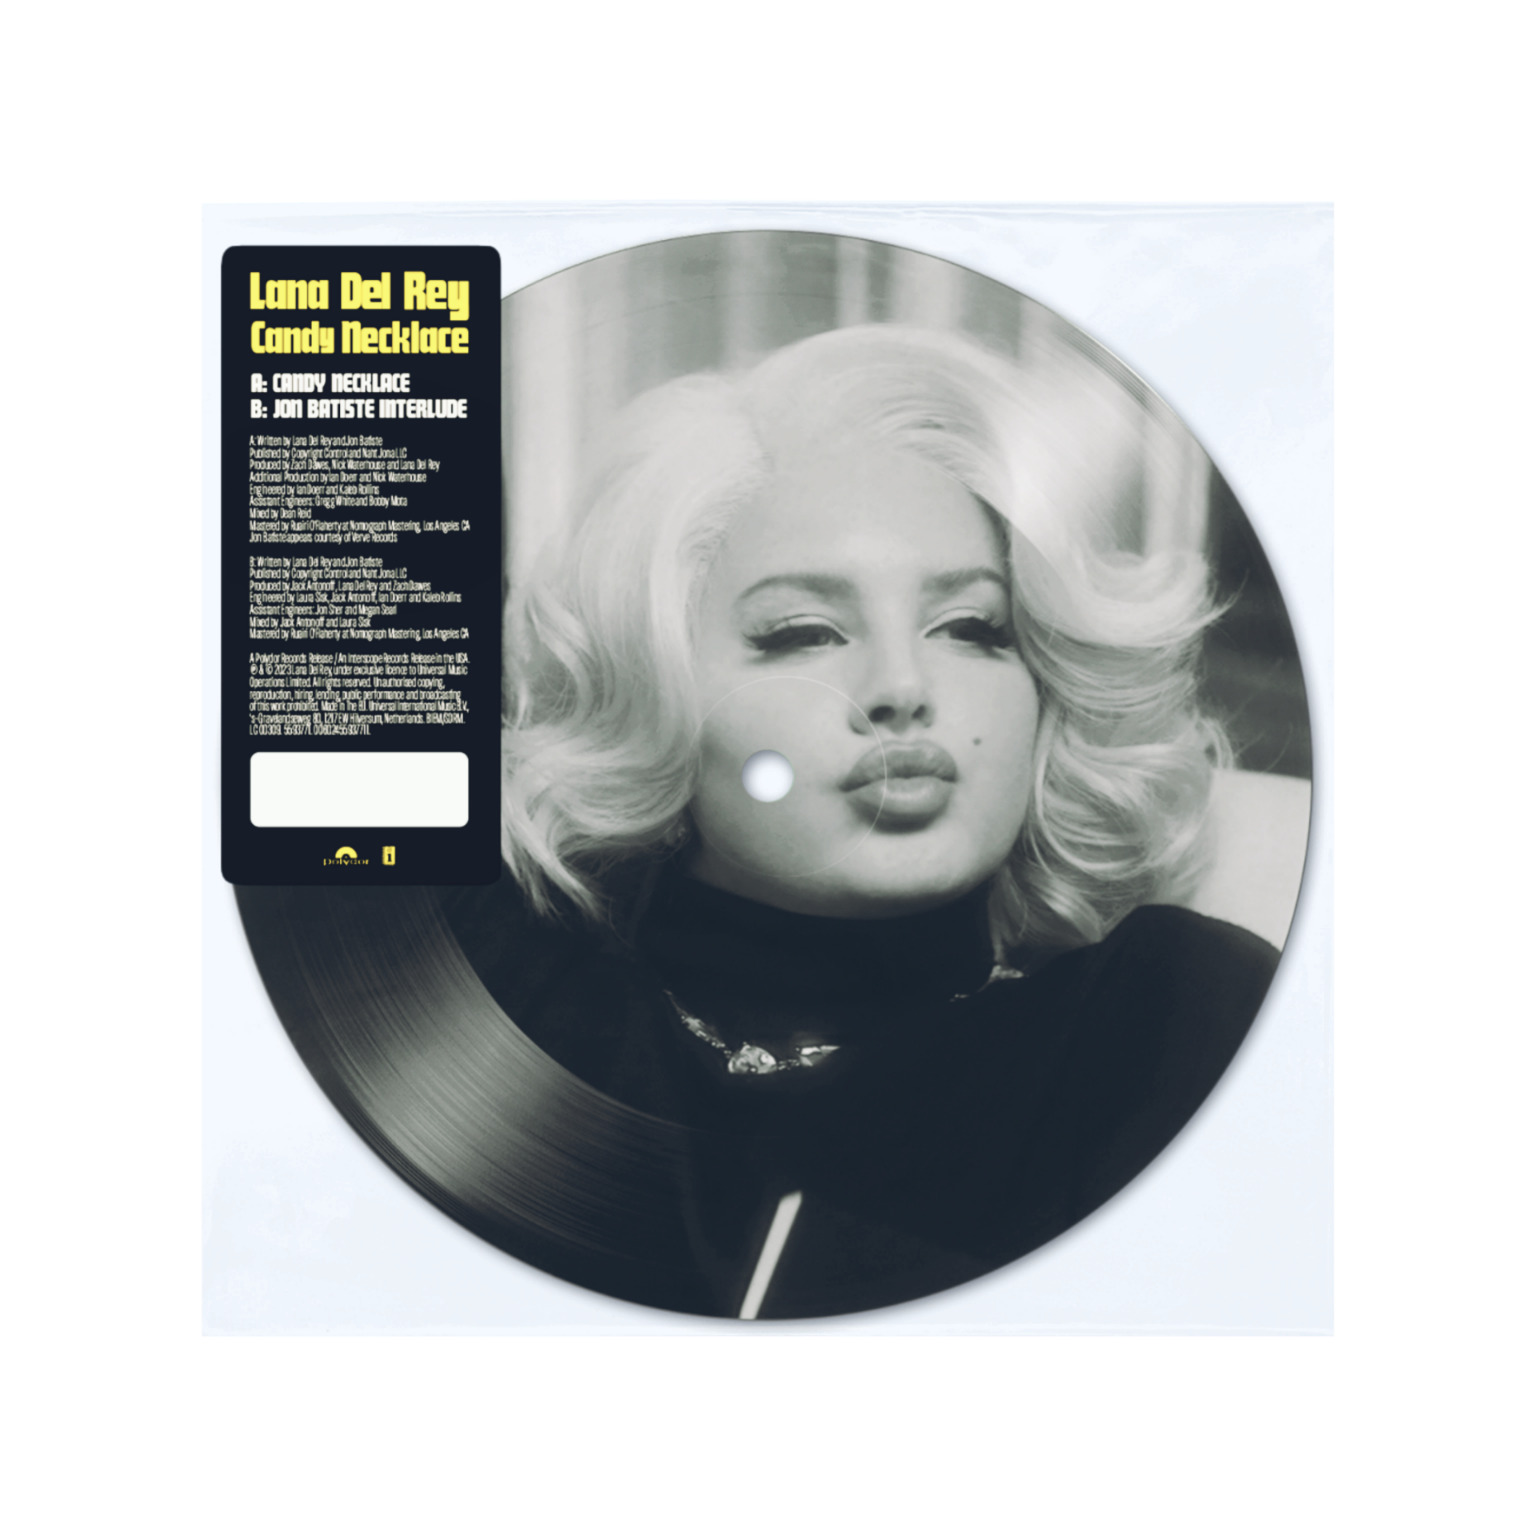 Lana-Del_Rey_Candy_Necklace_7in_Vinyl_Picture_Disc